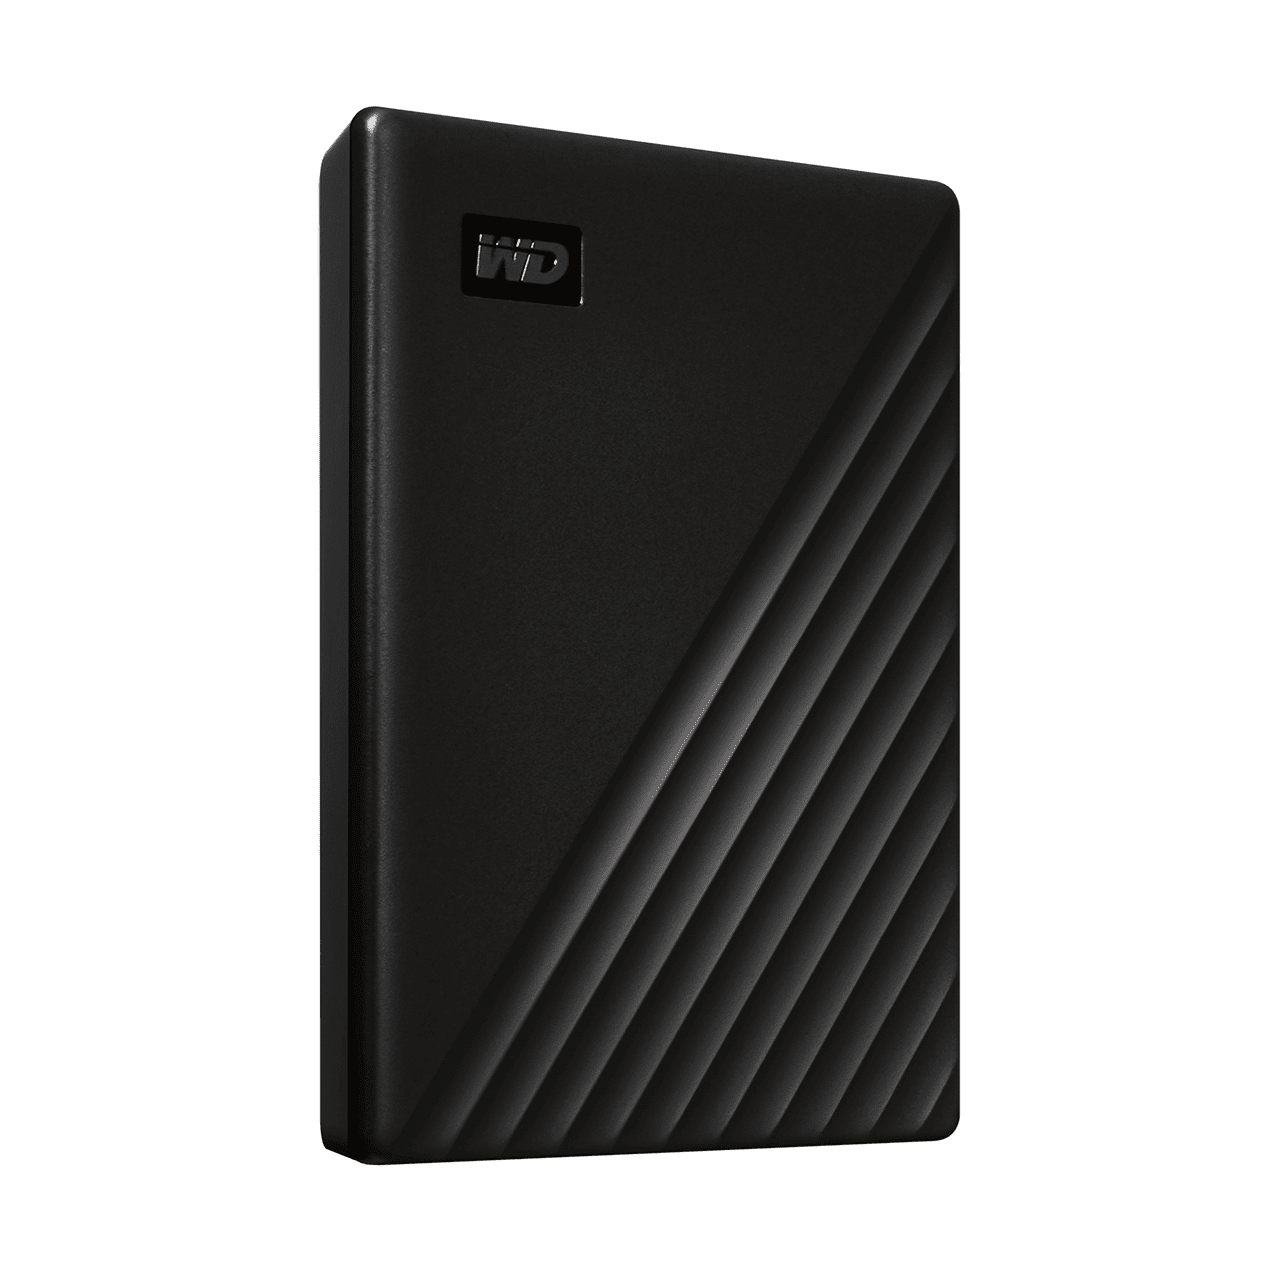 WD Western Digital My Passport  2TB ( BLACK ) Slim Portable External Hard Disk USB 3.0 With WD Backup Software & Password Protection